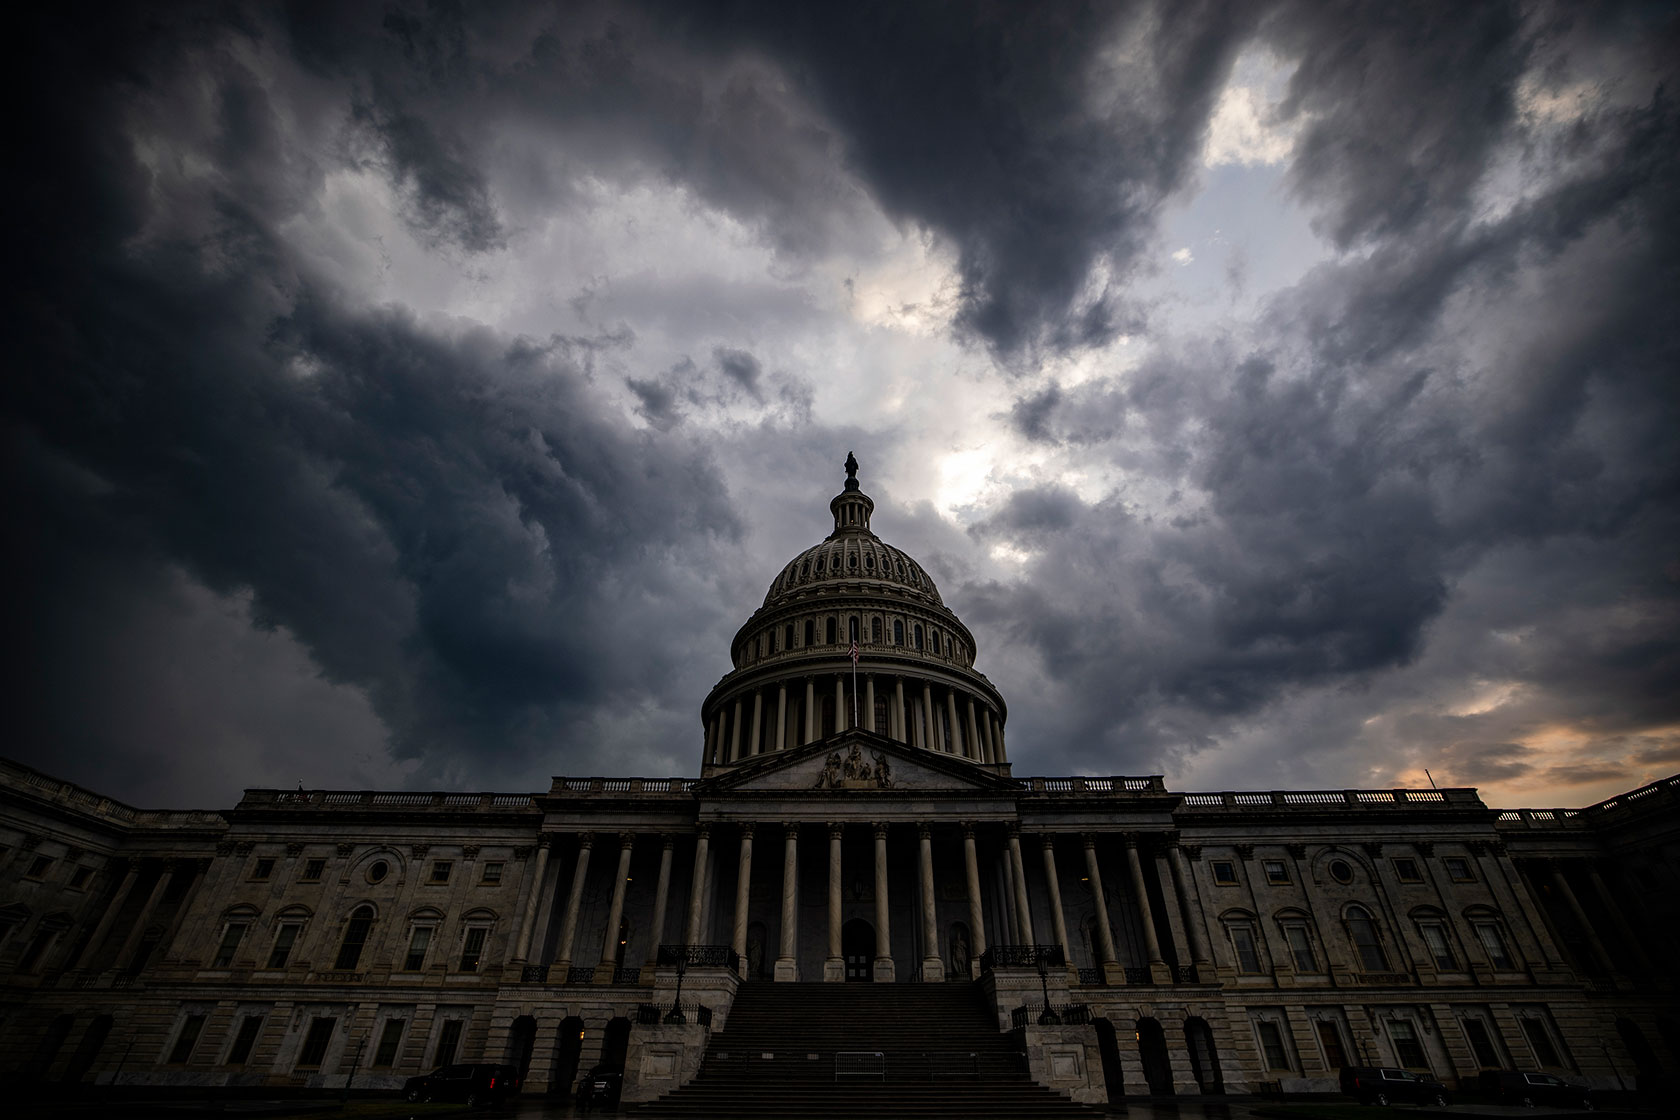 Photo shows the Capitol building against a background of dark gray storm clouds